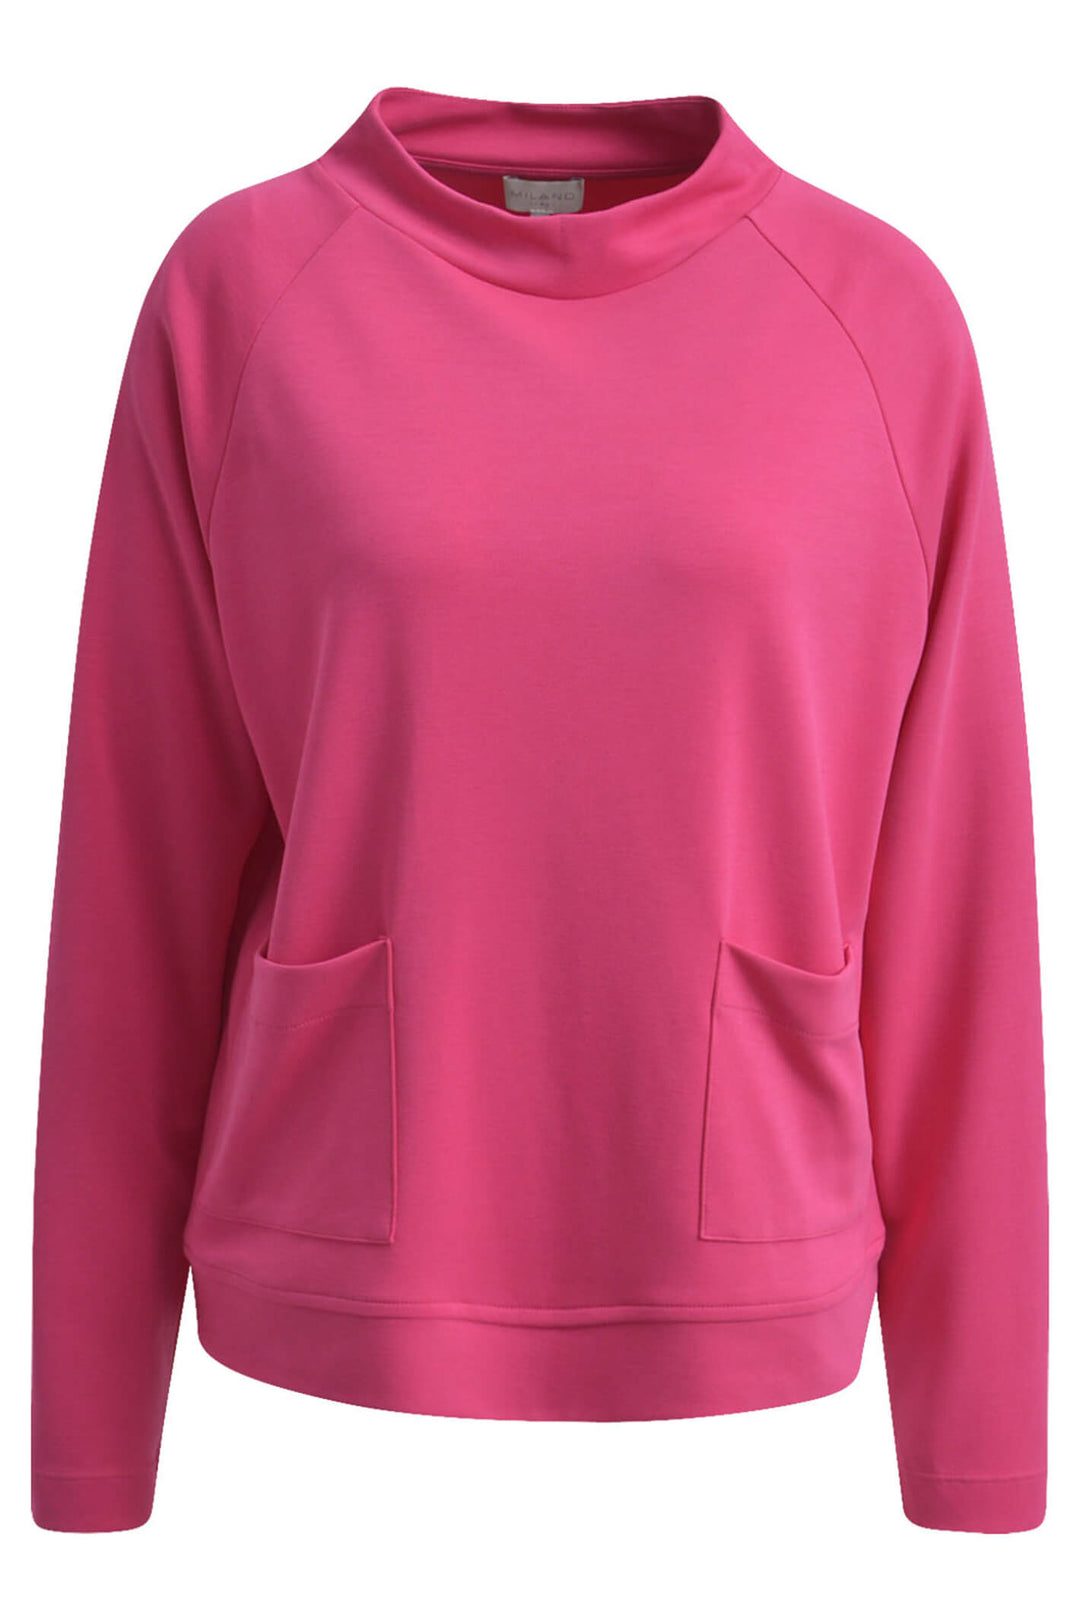 Milano 5190 Hot Pink With Pocket Detail Sweatshirt - Experience Boutique